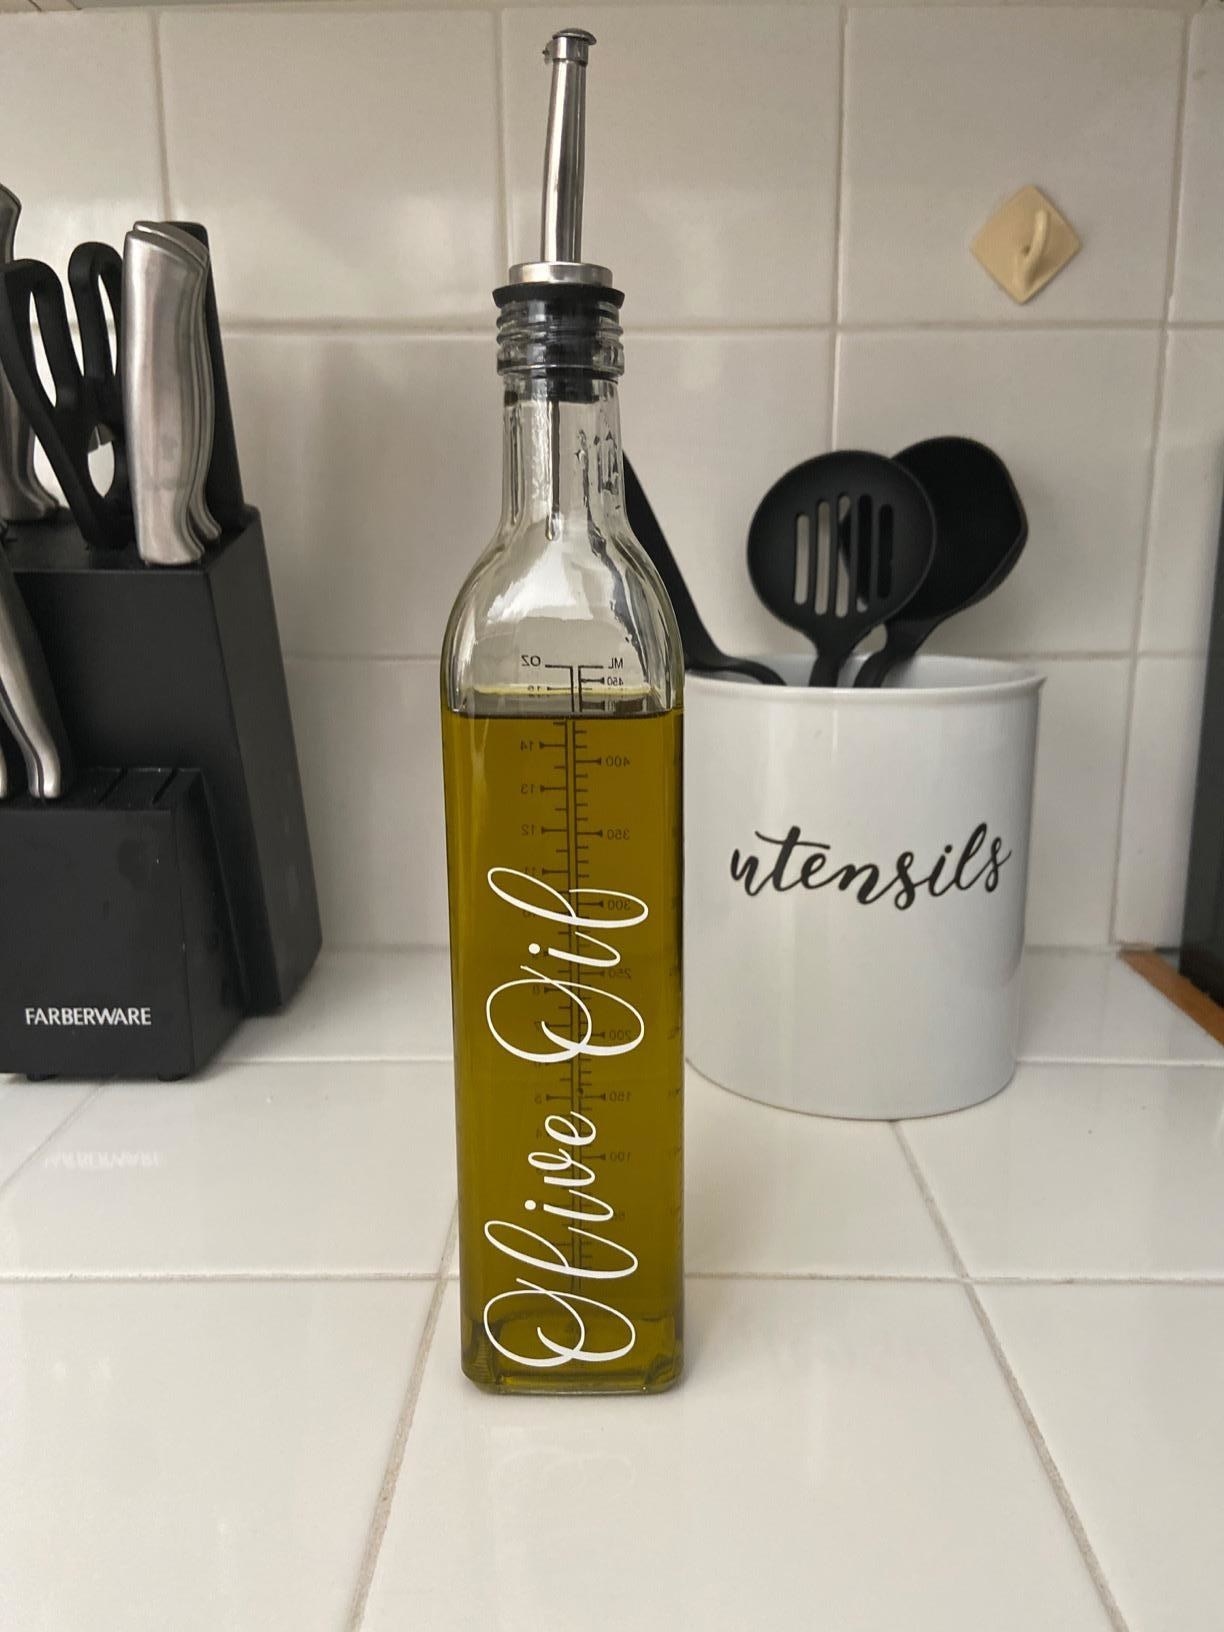 Reviewer image of olive oil bottle on their kitchen counter